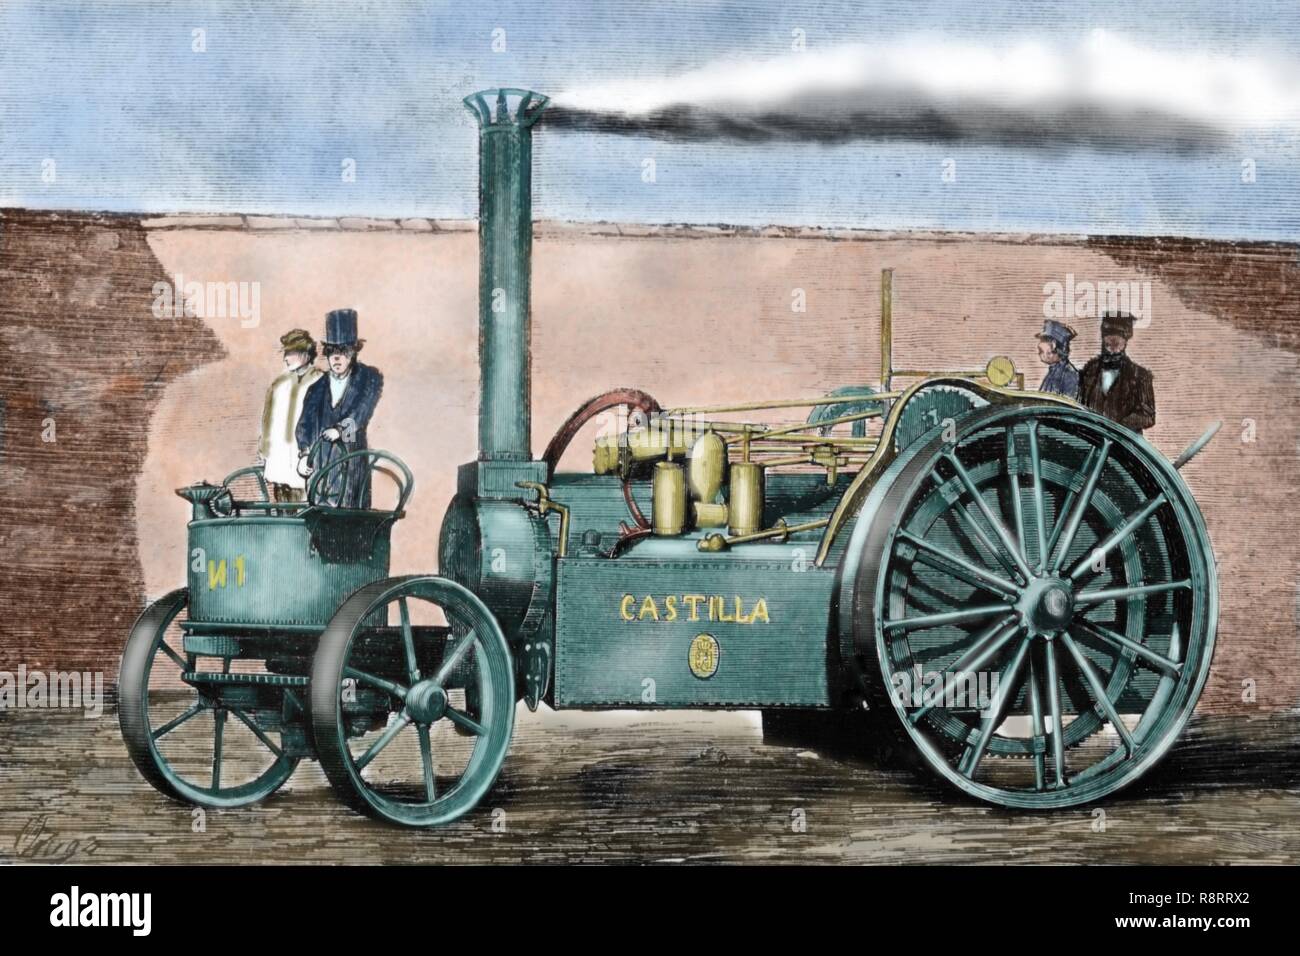 Spanish traction engine 'Castilla'  by Pedro de Ribera. It transports 4 people from Valladolid to Madrid, covering over 200 kilometers in 20 days in 1860. Stock Photo